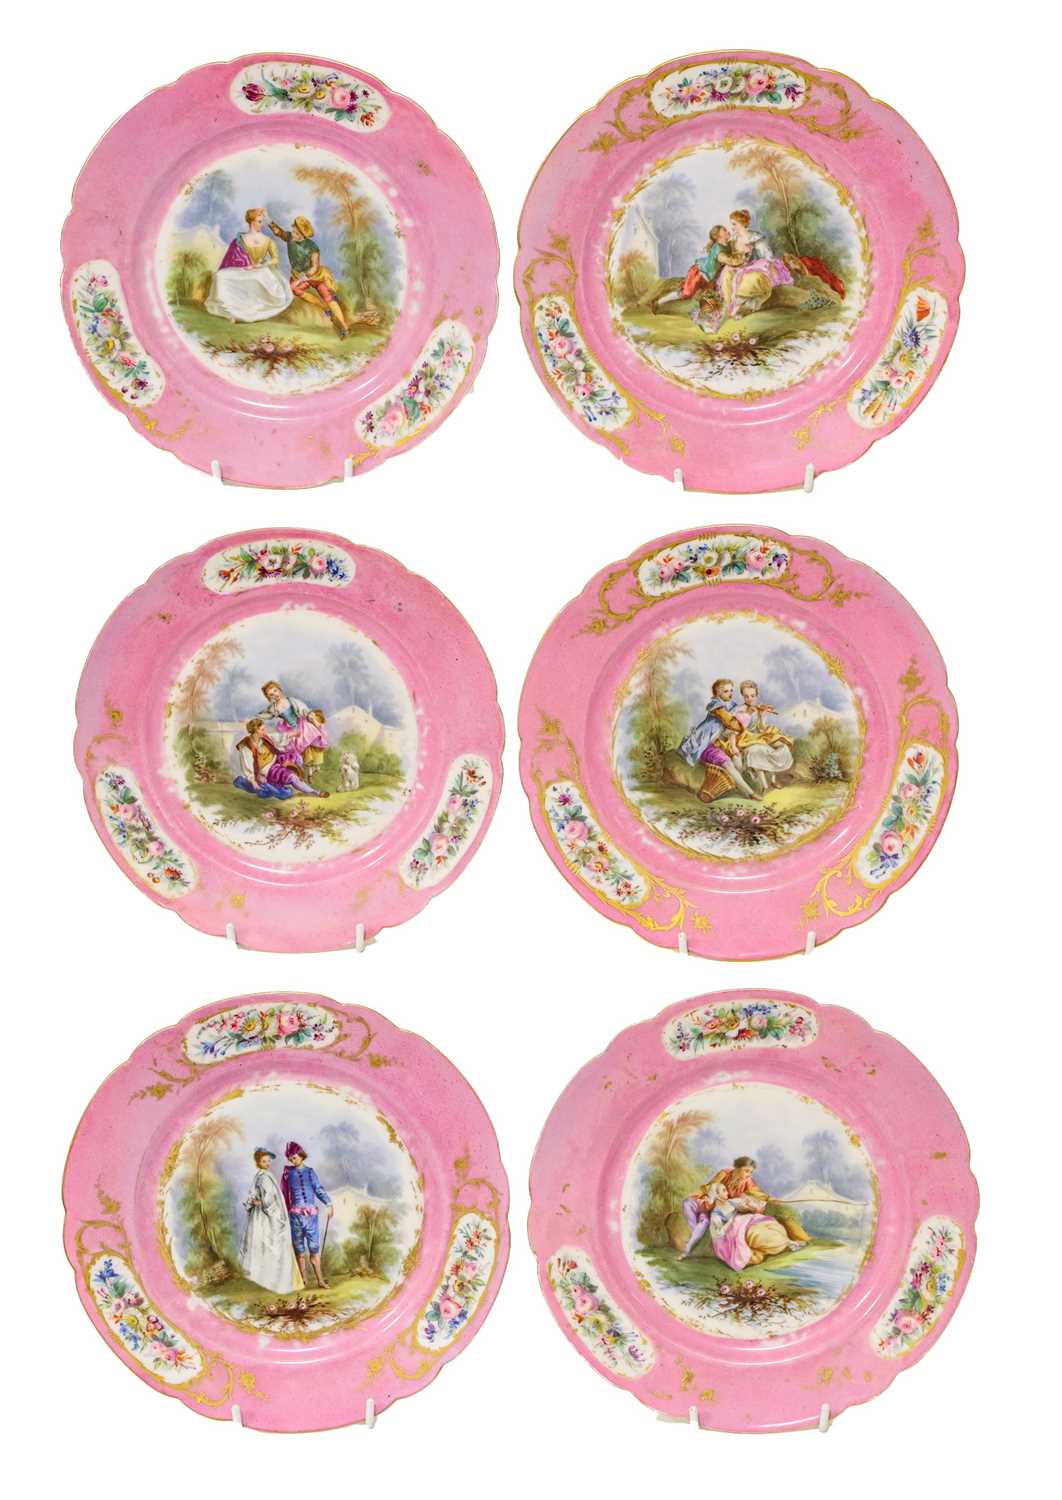 A Sevres-Style Porcelain Dessert Service, late 19th century, painted with Watteauesque figures in - Image 3 of 12